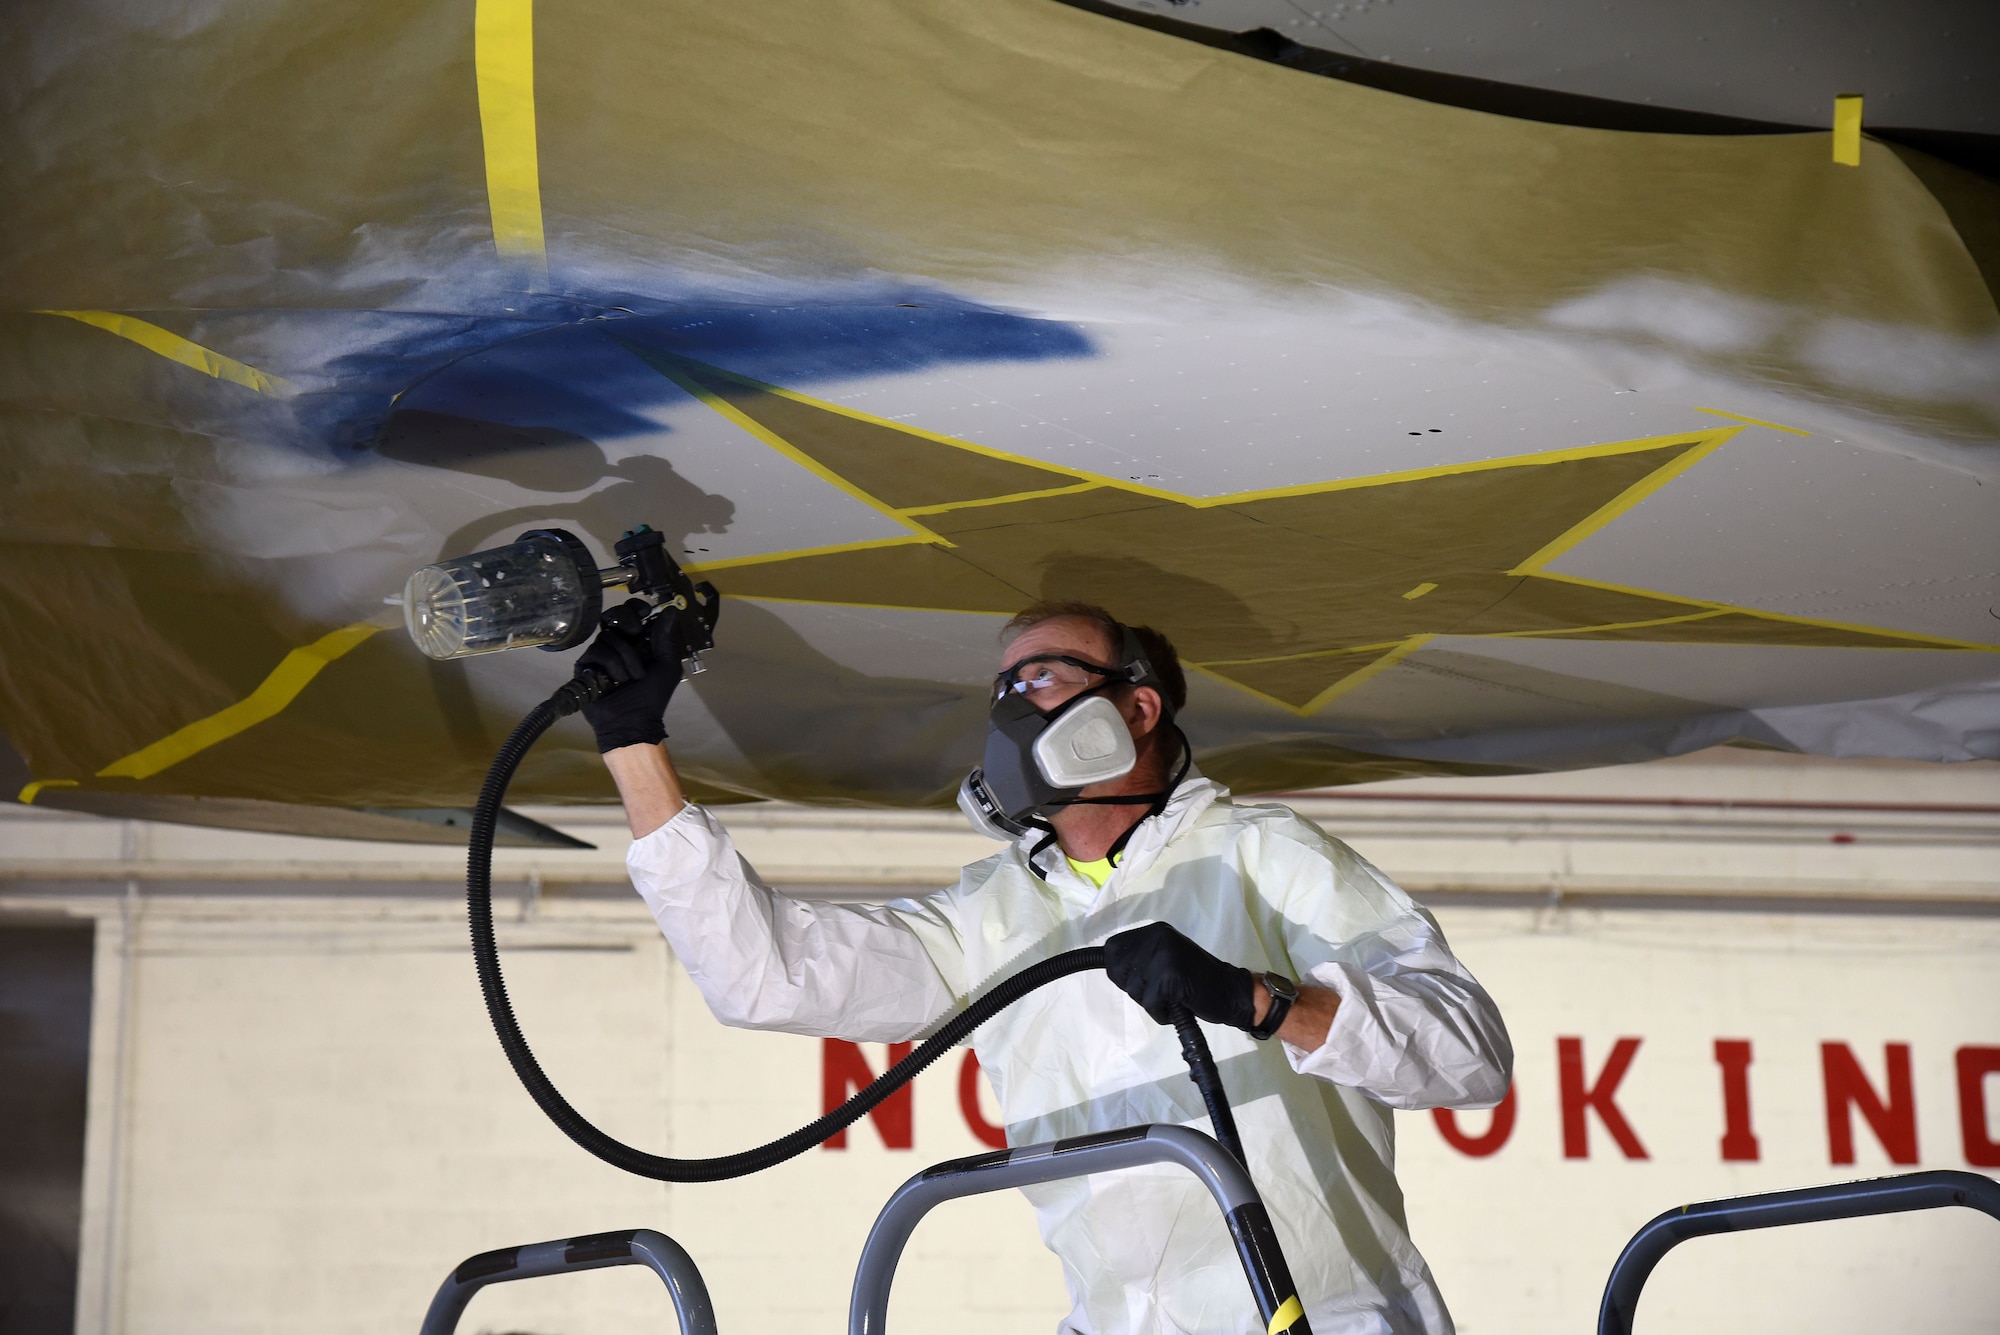 DAYTON, Ohio (12/06/2017) -- National Museum of the U.S. Air Force restoration crews continue the painting process on the Boeing B-17F Memphis Belle™. Plans call for the aircraft to be placed on permanent public display in the WWII Gallery here at the National Museum of the U.S. Air Force on May 17, 2018. (U.S. Air Force photo by Ken LaRock)